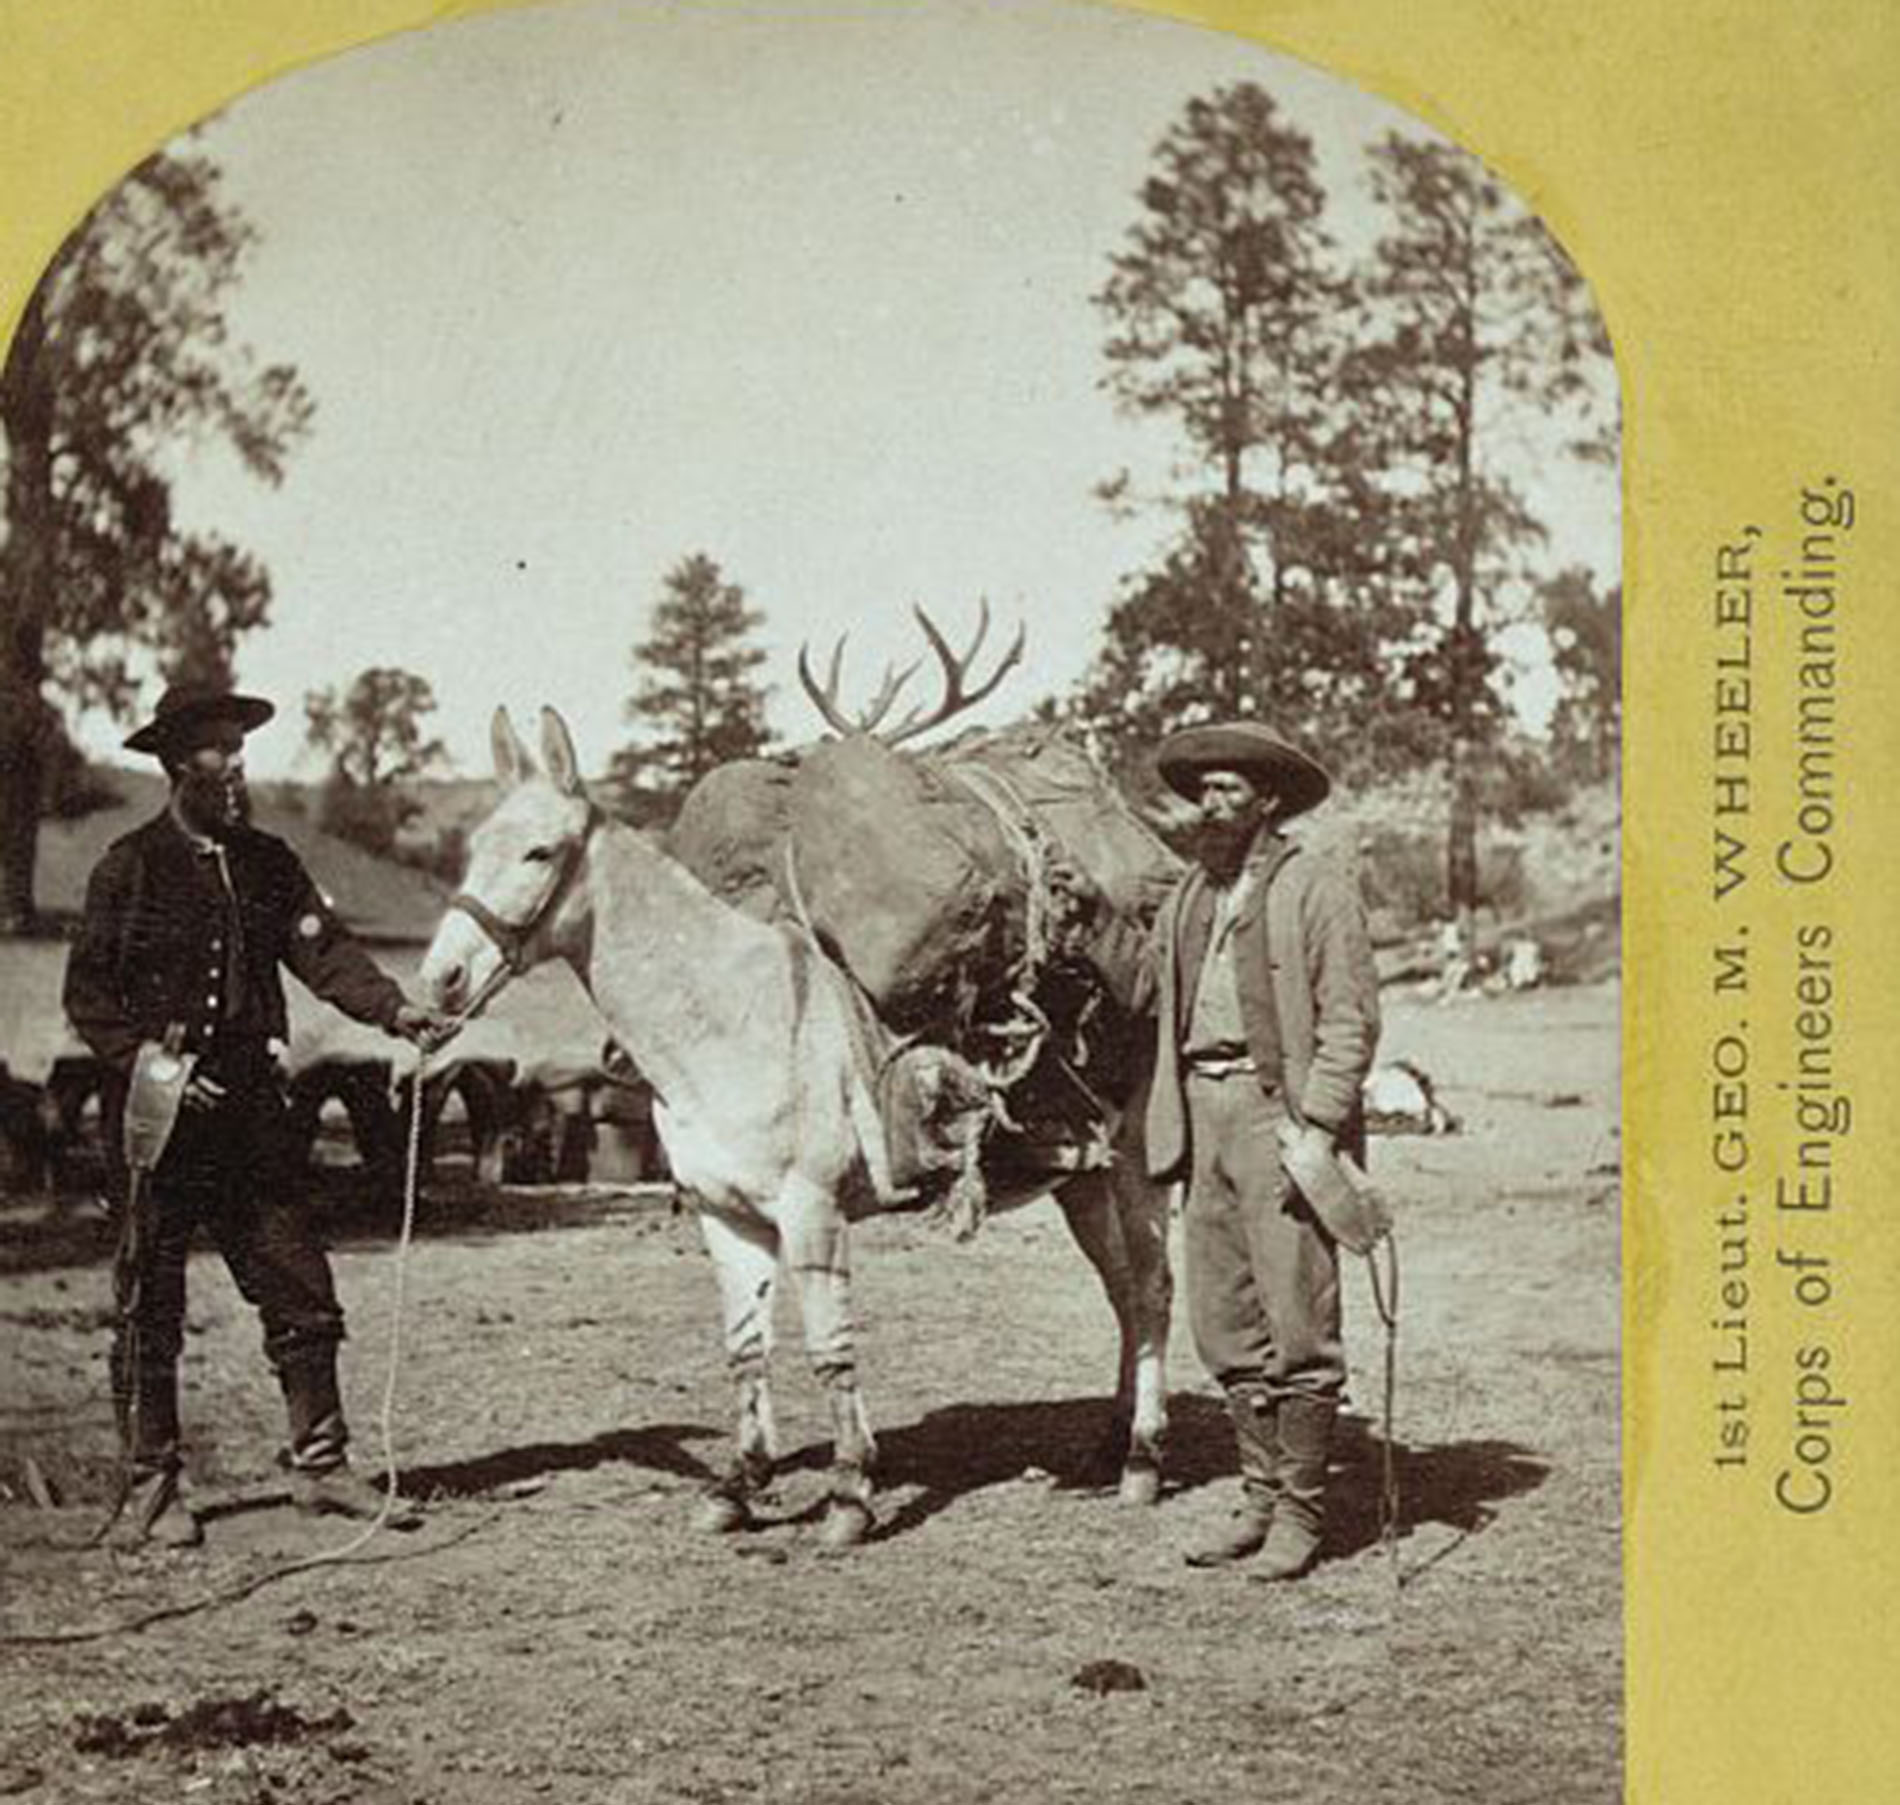 Two men standing near a mule with packs